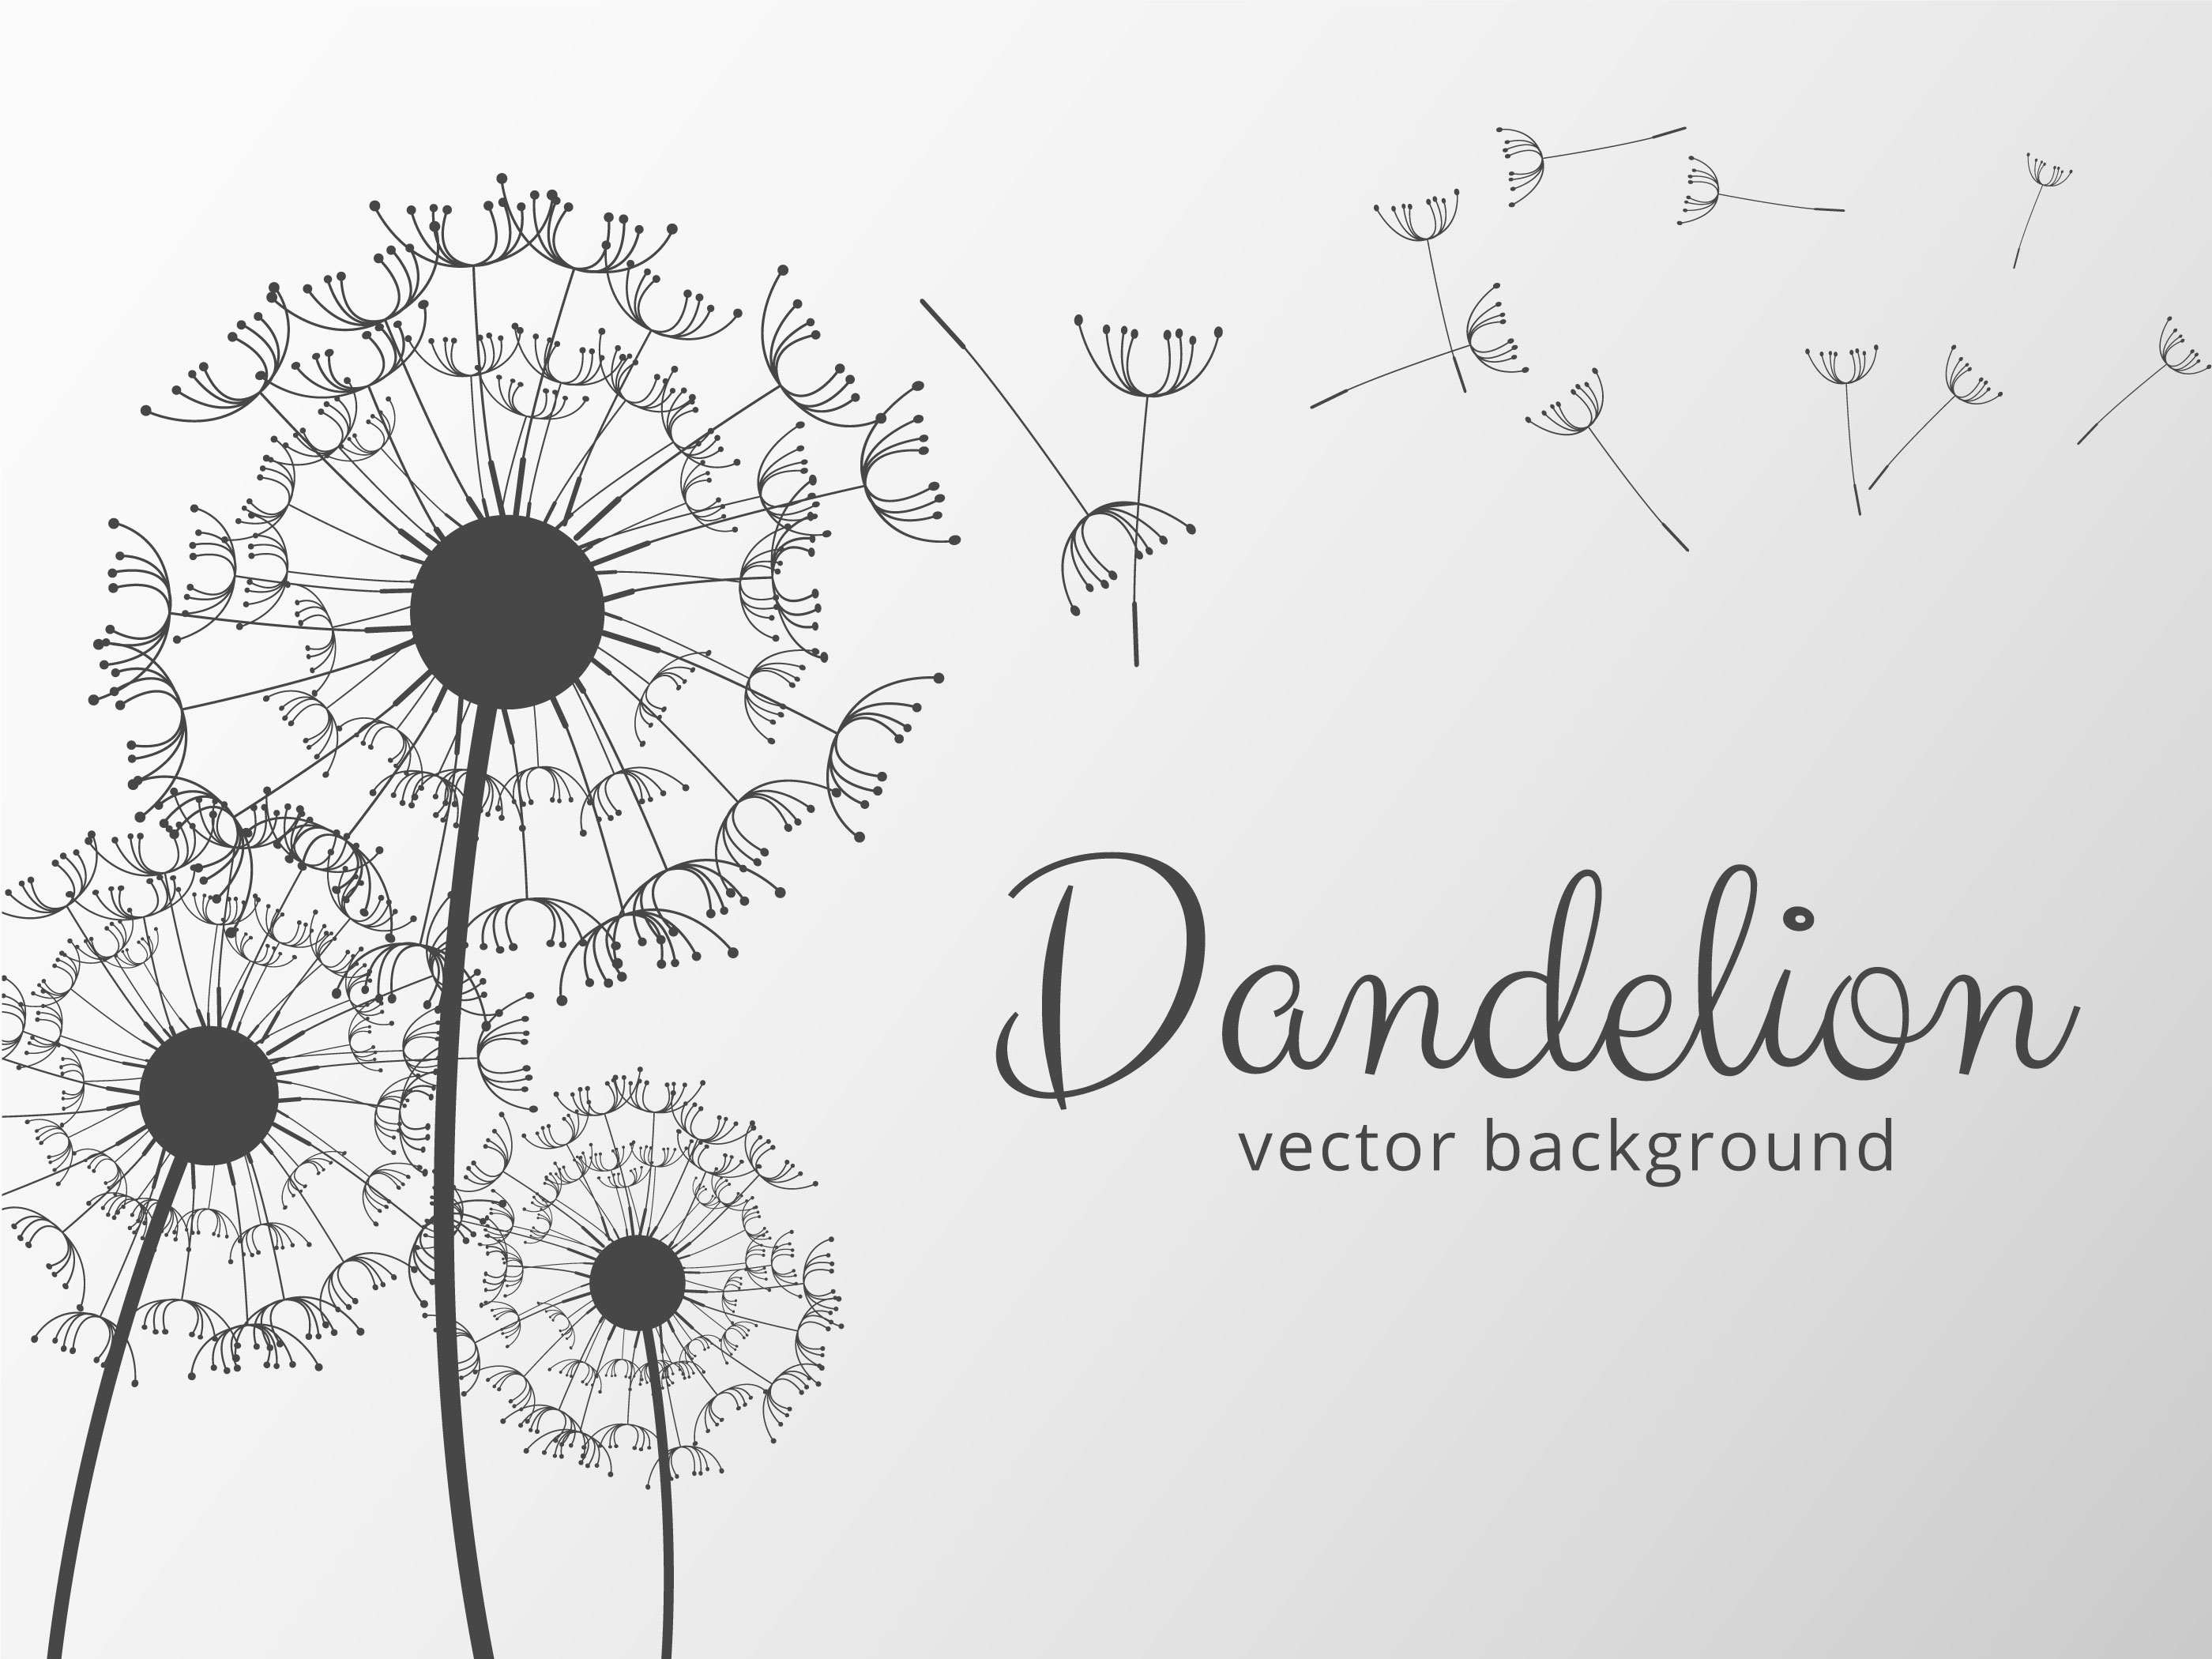 Download Free Vector of the Day #41: Dandelion Background 226320 - Download Free Vectors, Clipart ...